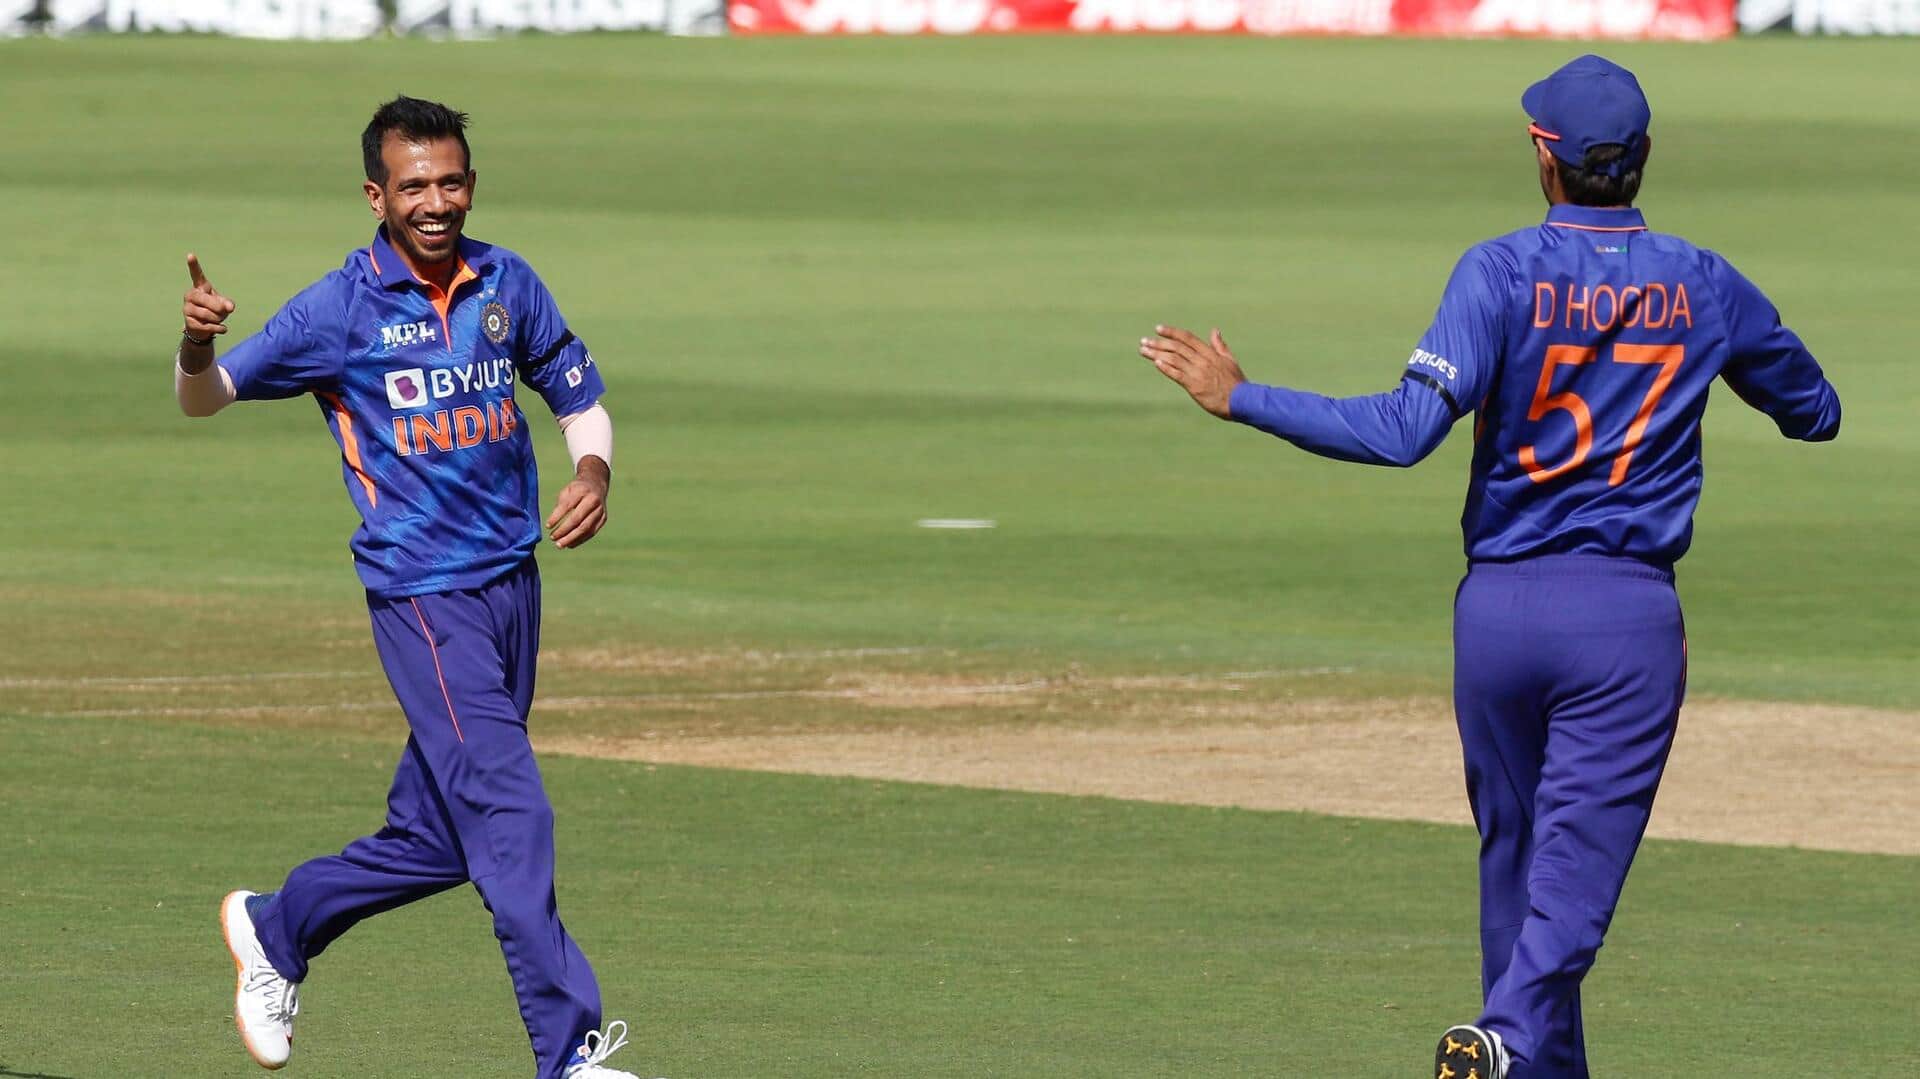 Yuzvendra Chahal claims six-fer, surpasses 200 List A wickets: Stats